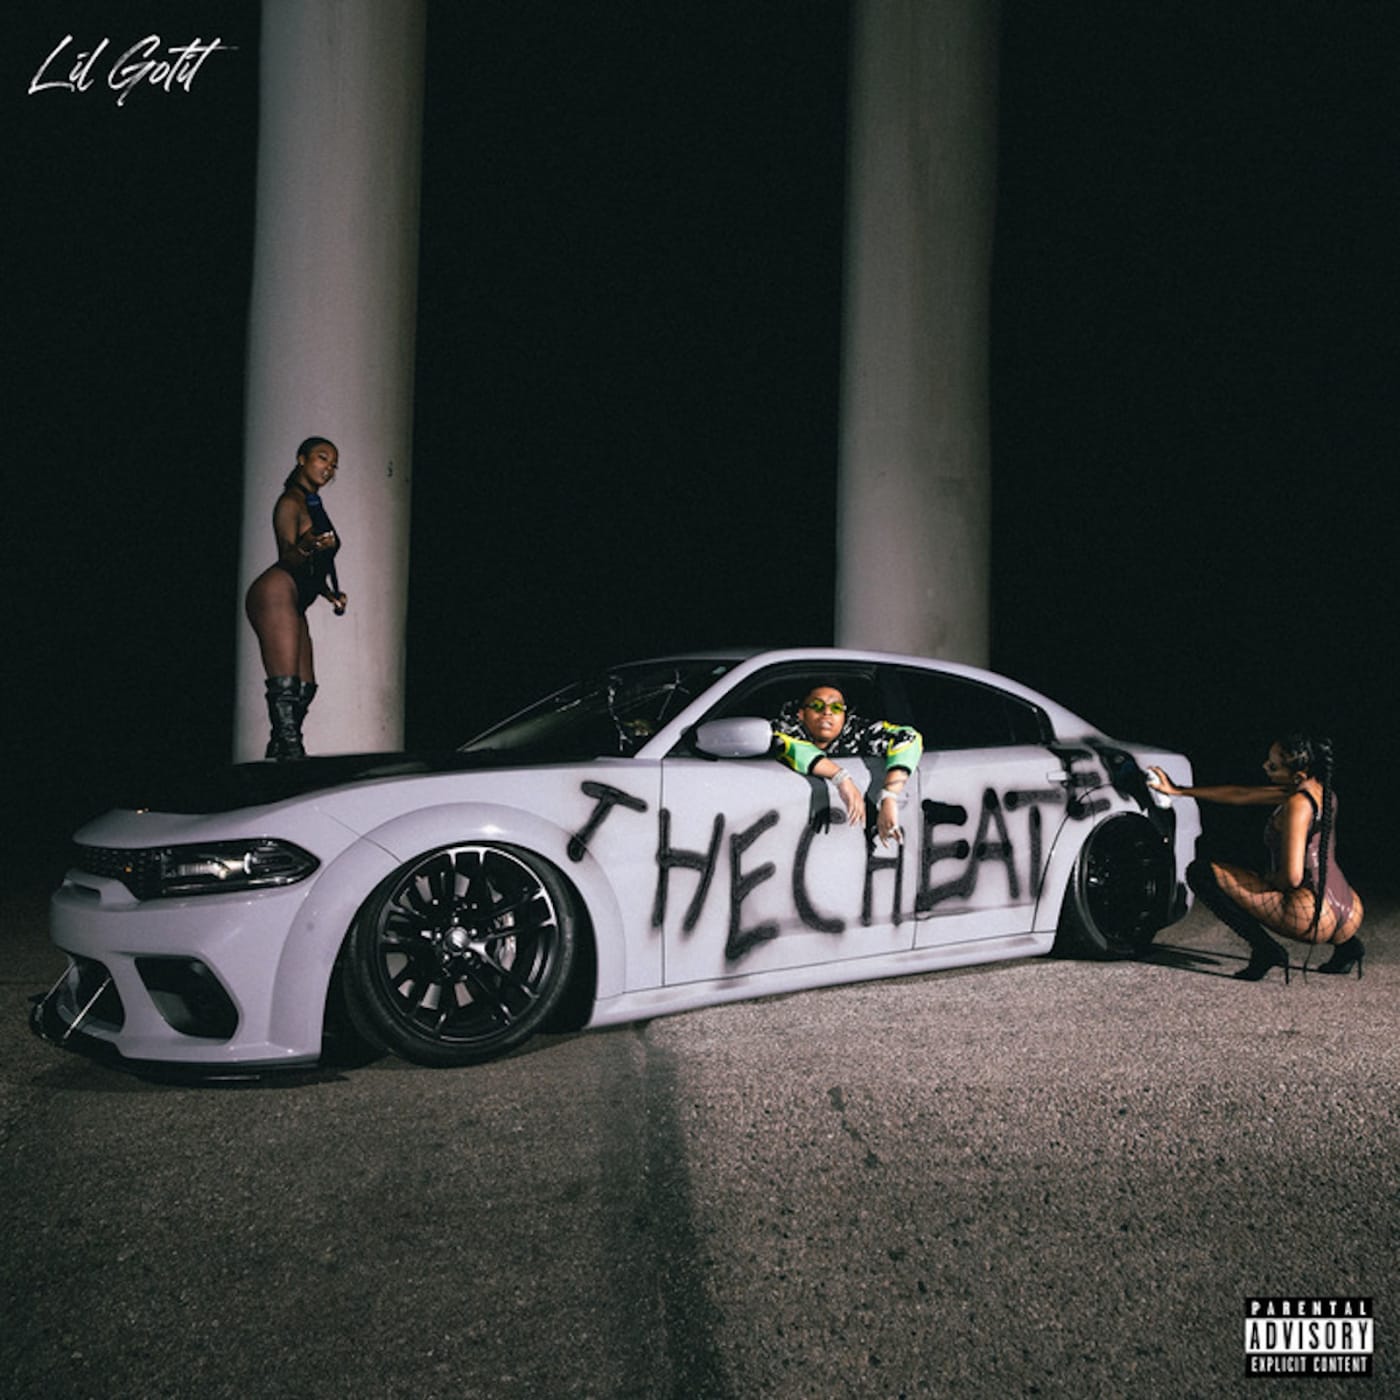 Lil Gotit's new project 'The Cheater'